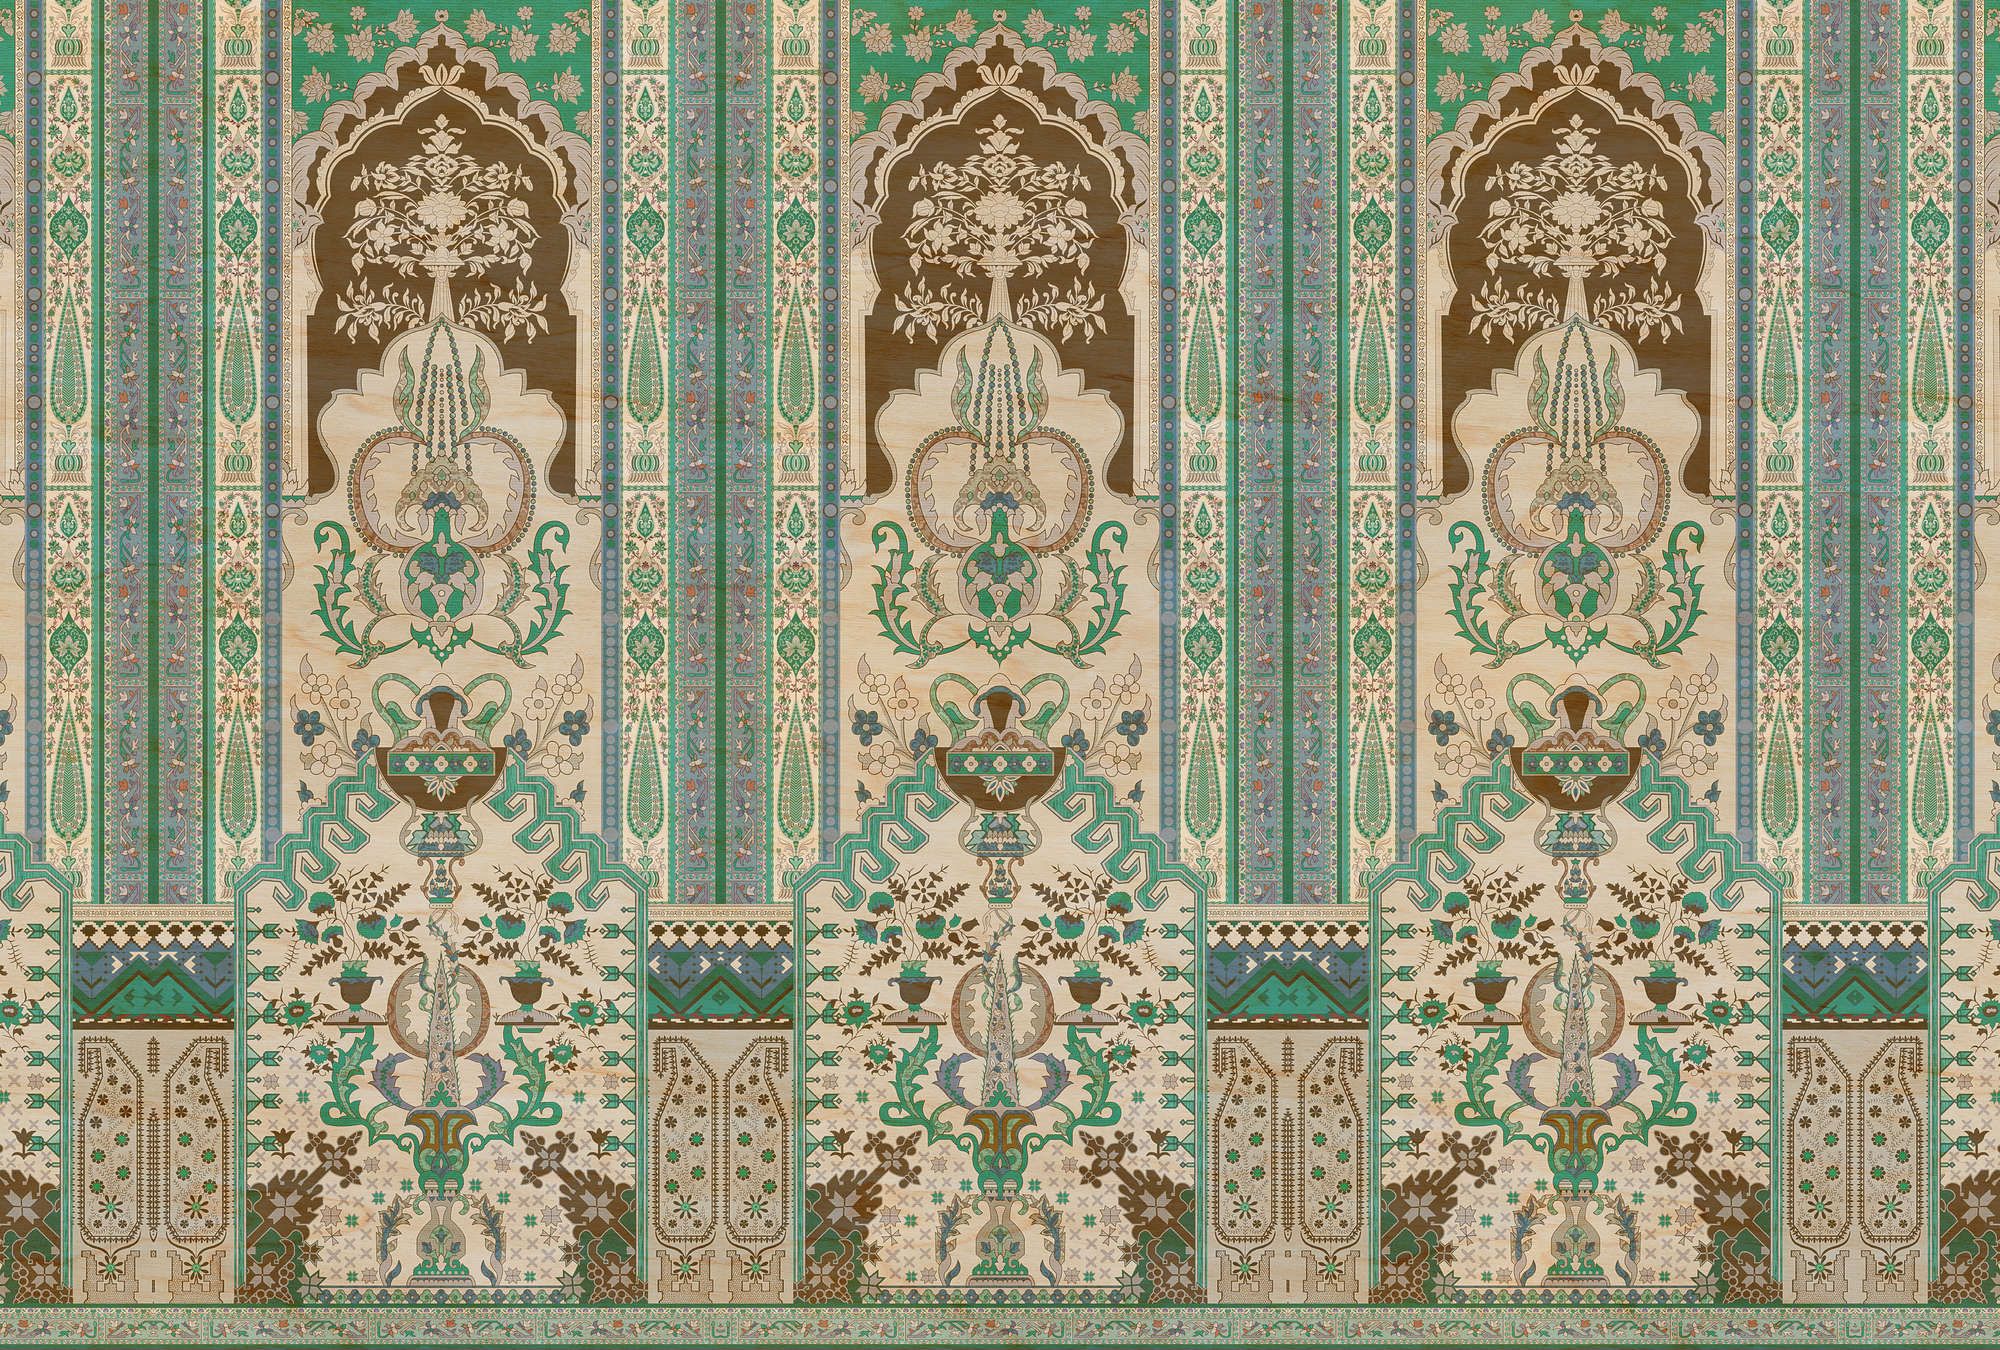             Photo wallpaper »tara« - Ornamental panelling with plywood texture - Green, beige | Smooth, slightly pearlescent non-woven fabric
        